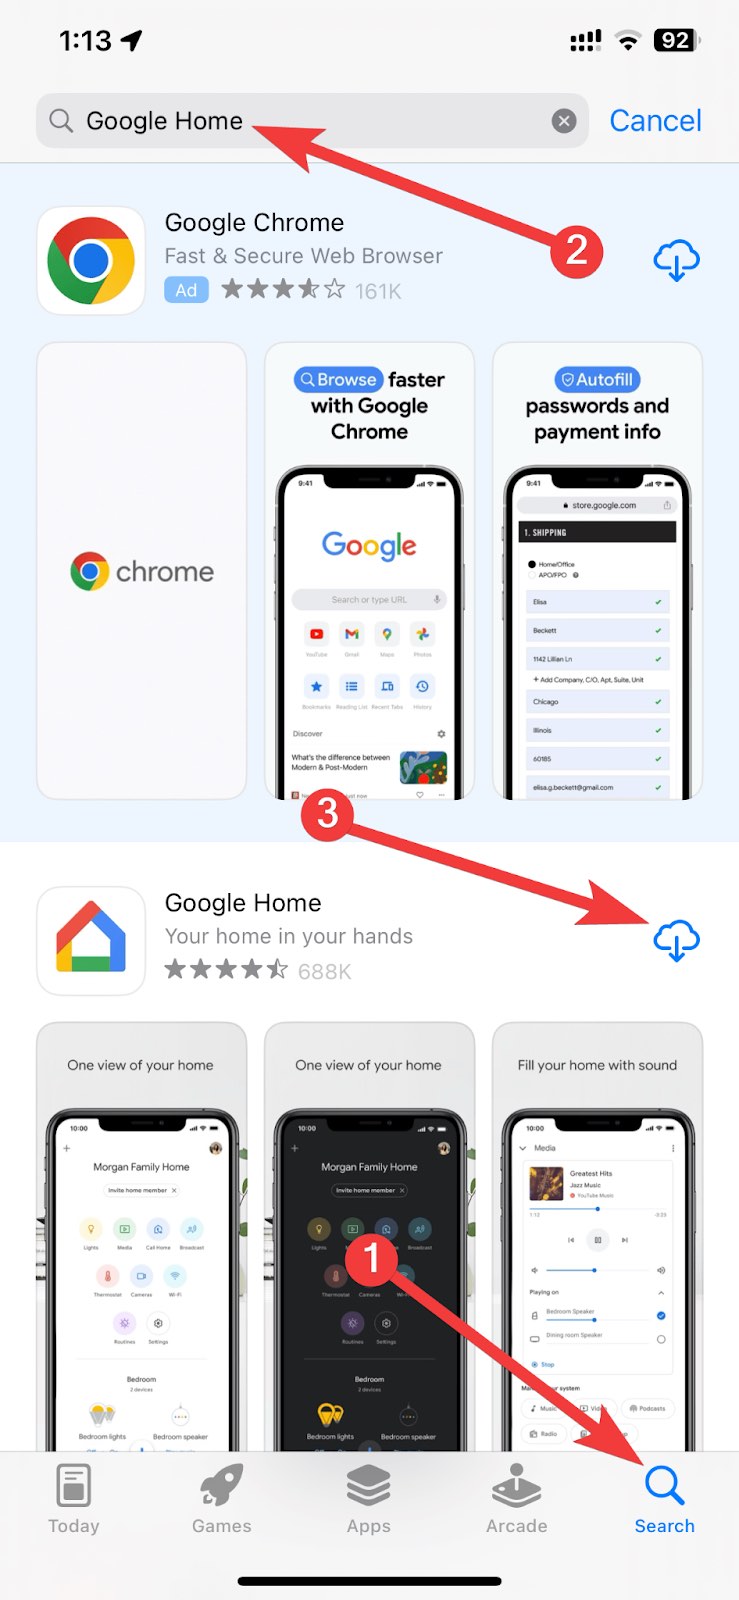 Download Google Home app from the App Store